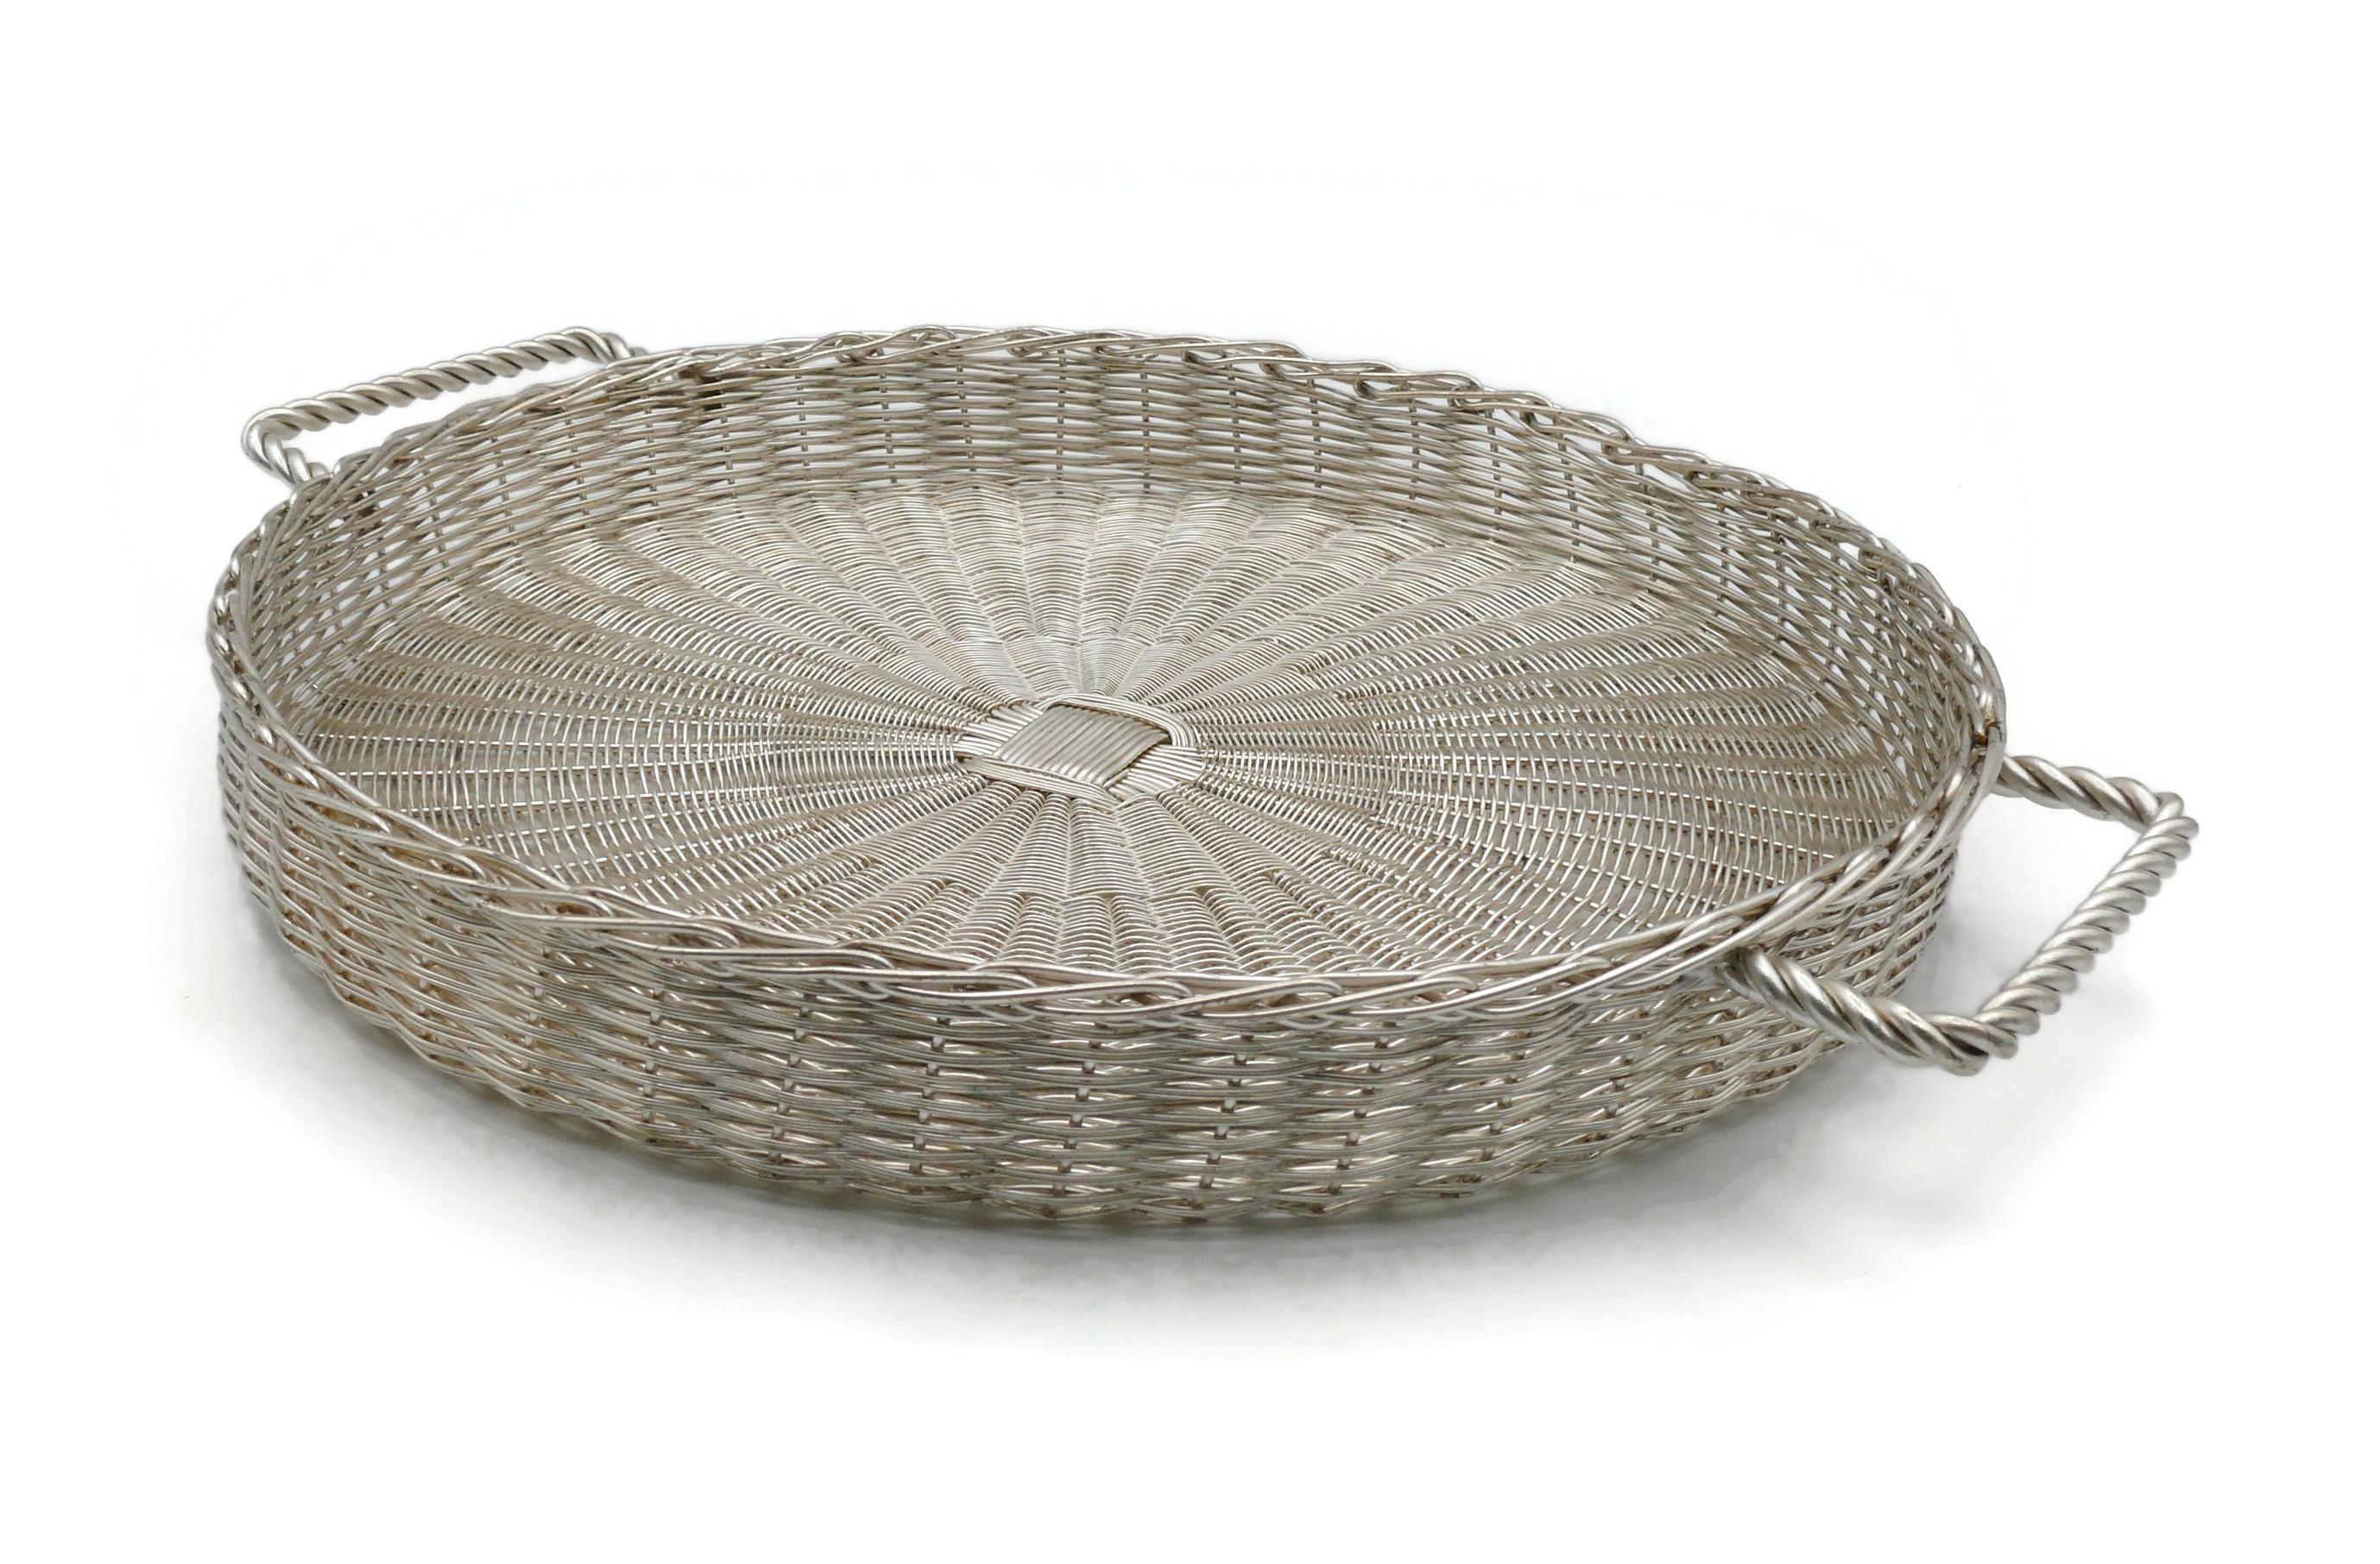 CHRISTIAN DIOR Home Collection Vintage Silver Plated Wicker Style Basket 2